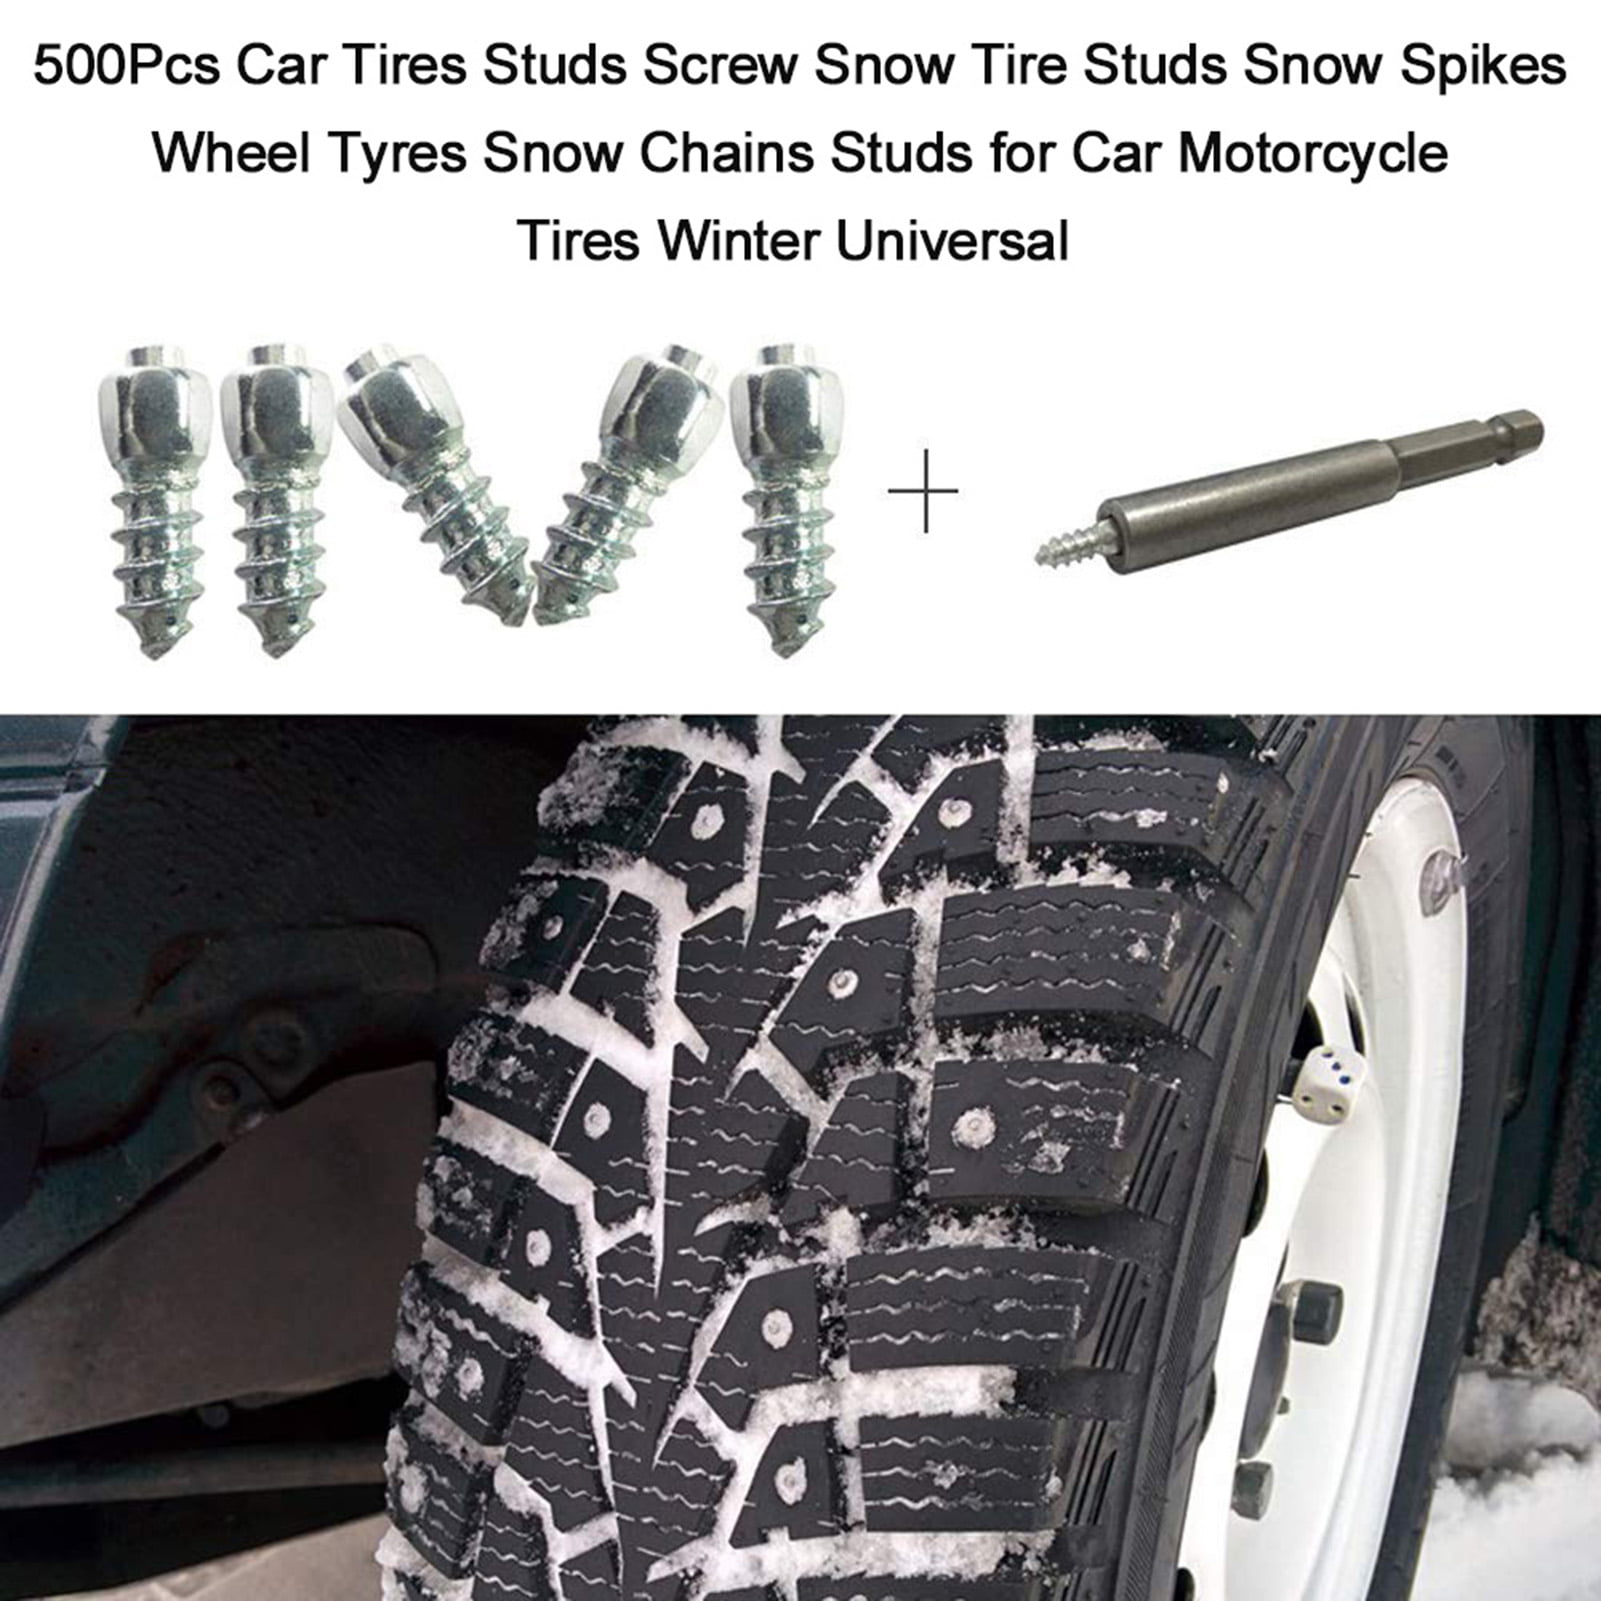 100pcs Tire Stud Screws Snow Chains flat tire studs 8-12-1mm For Car Motorcycle 